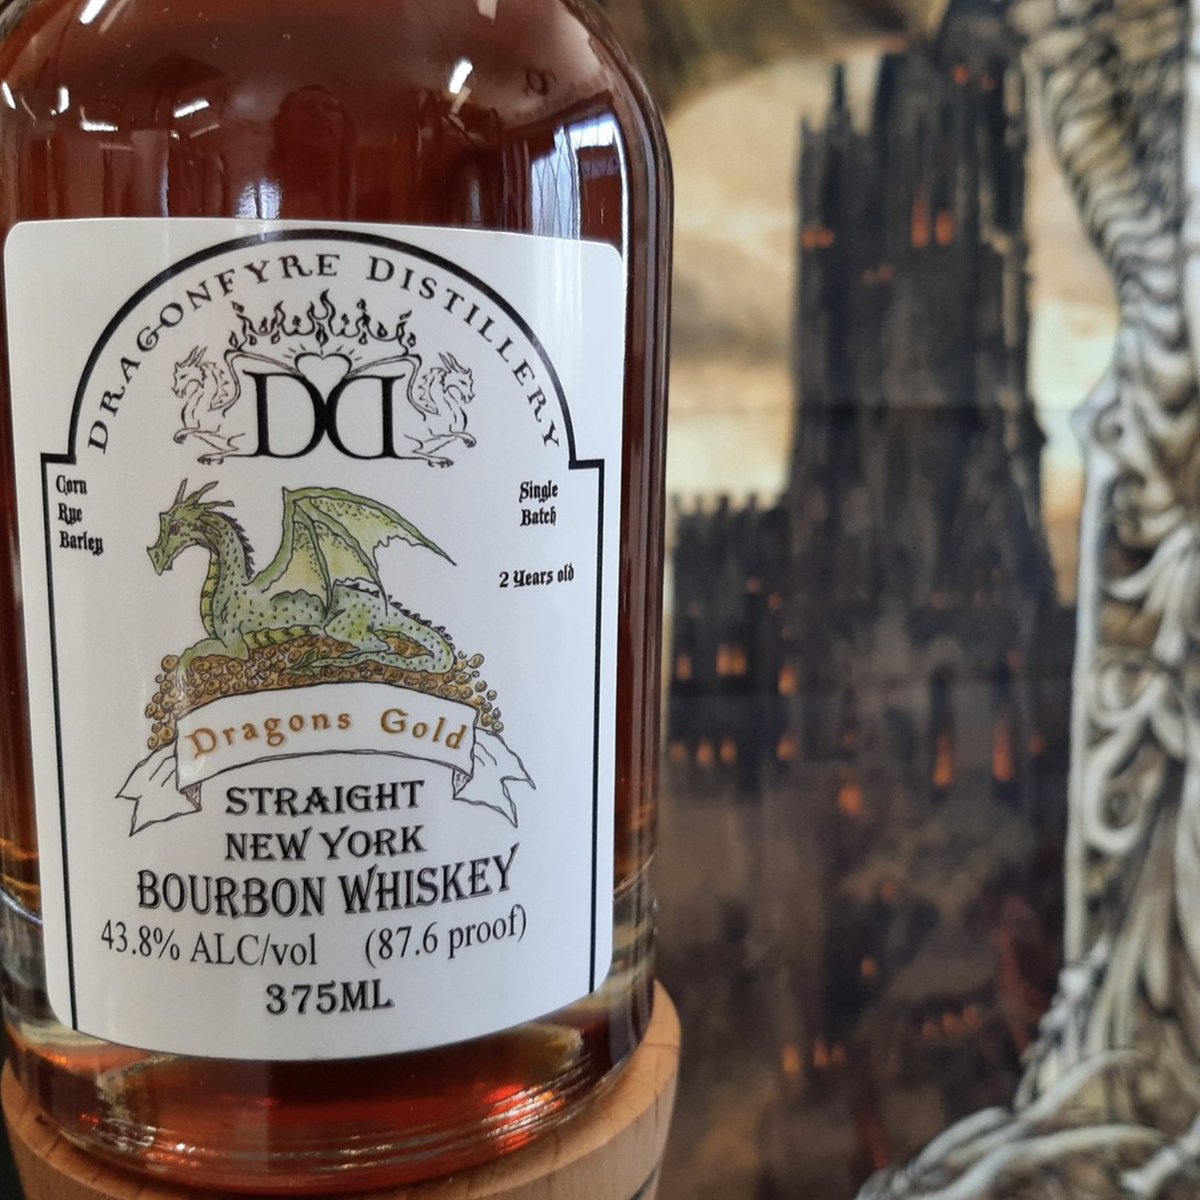 The next time you’re looking for a new bourbon to try, pick up a bottle from Dragonfyre Distillery! Their bourbon is made from locally grown corn, rye, and barley, with fruity and floral chocolate and cherry notes. #dragonfyredistillery #bourbonwhiskey #craftspirits